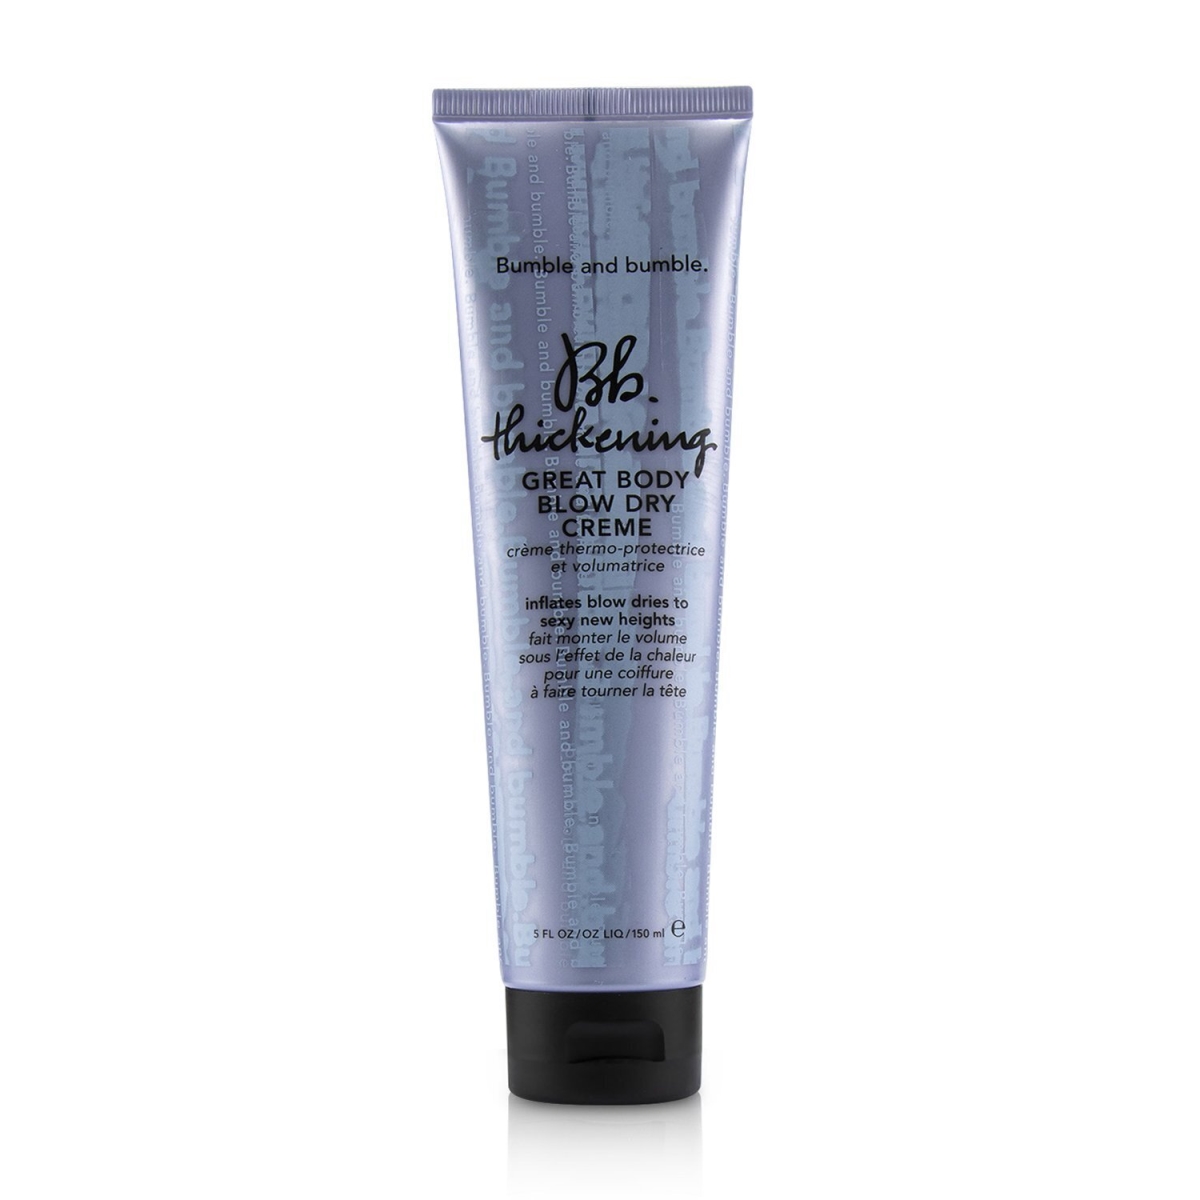 Picture of Bumble & Bumble 242206 5 oz Bb. Thickening Great Body Blow Dry Creme